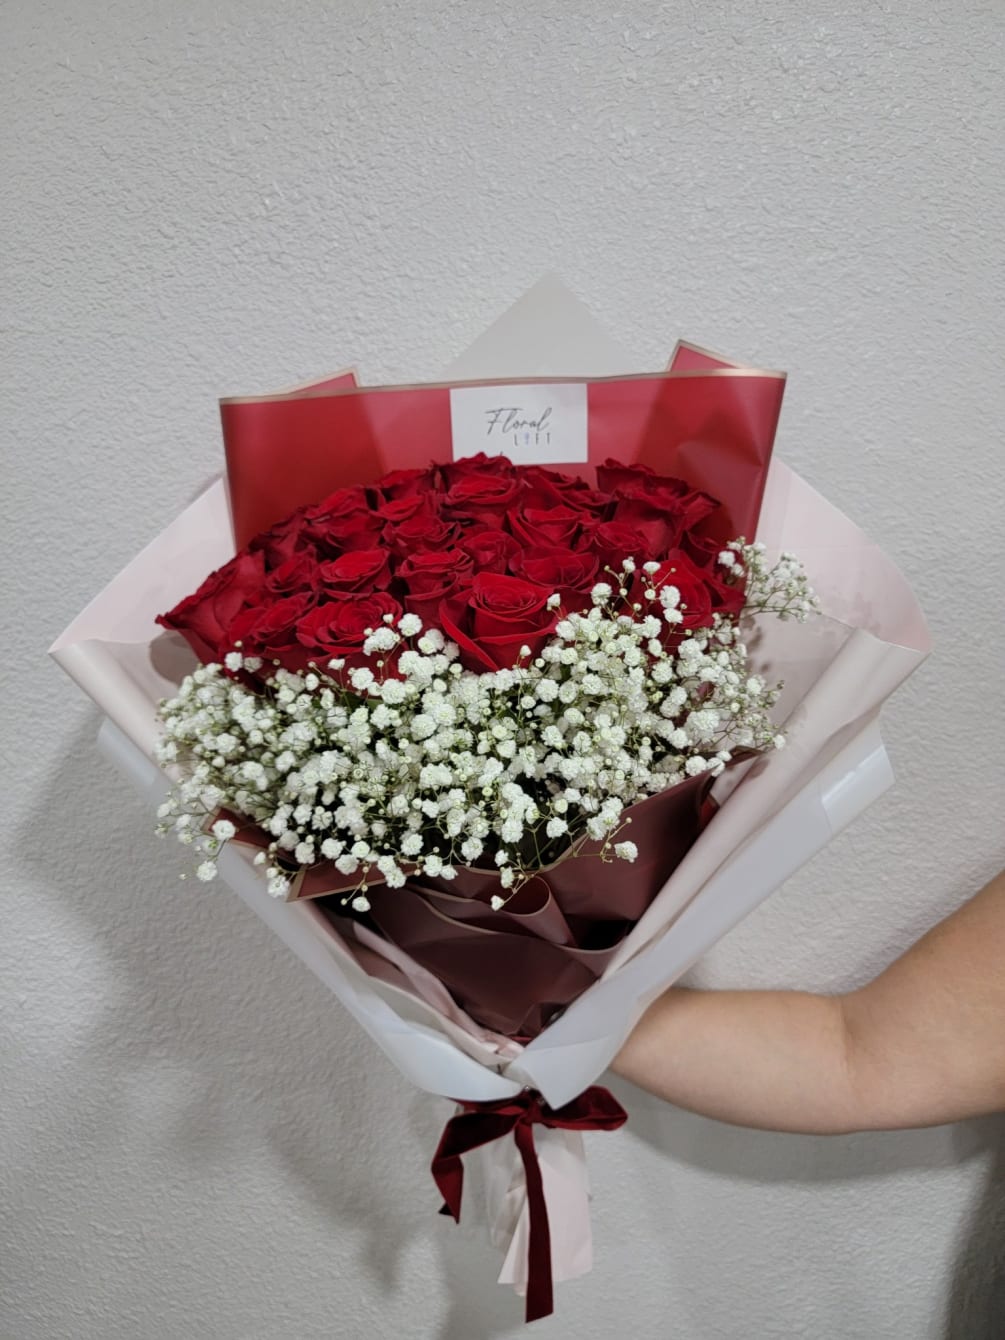 2 dozen red roses and babies breath